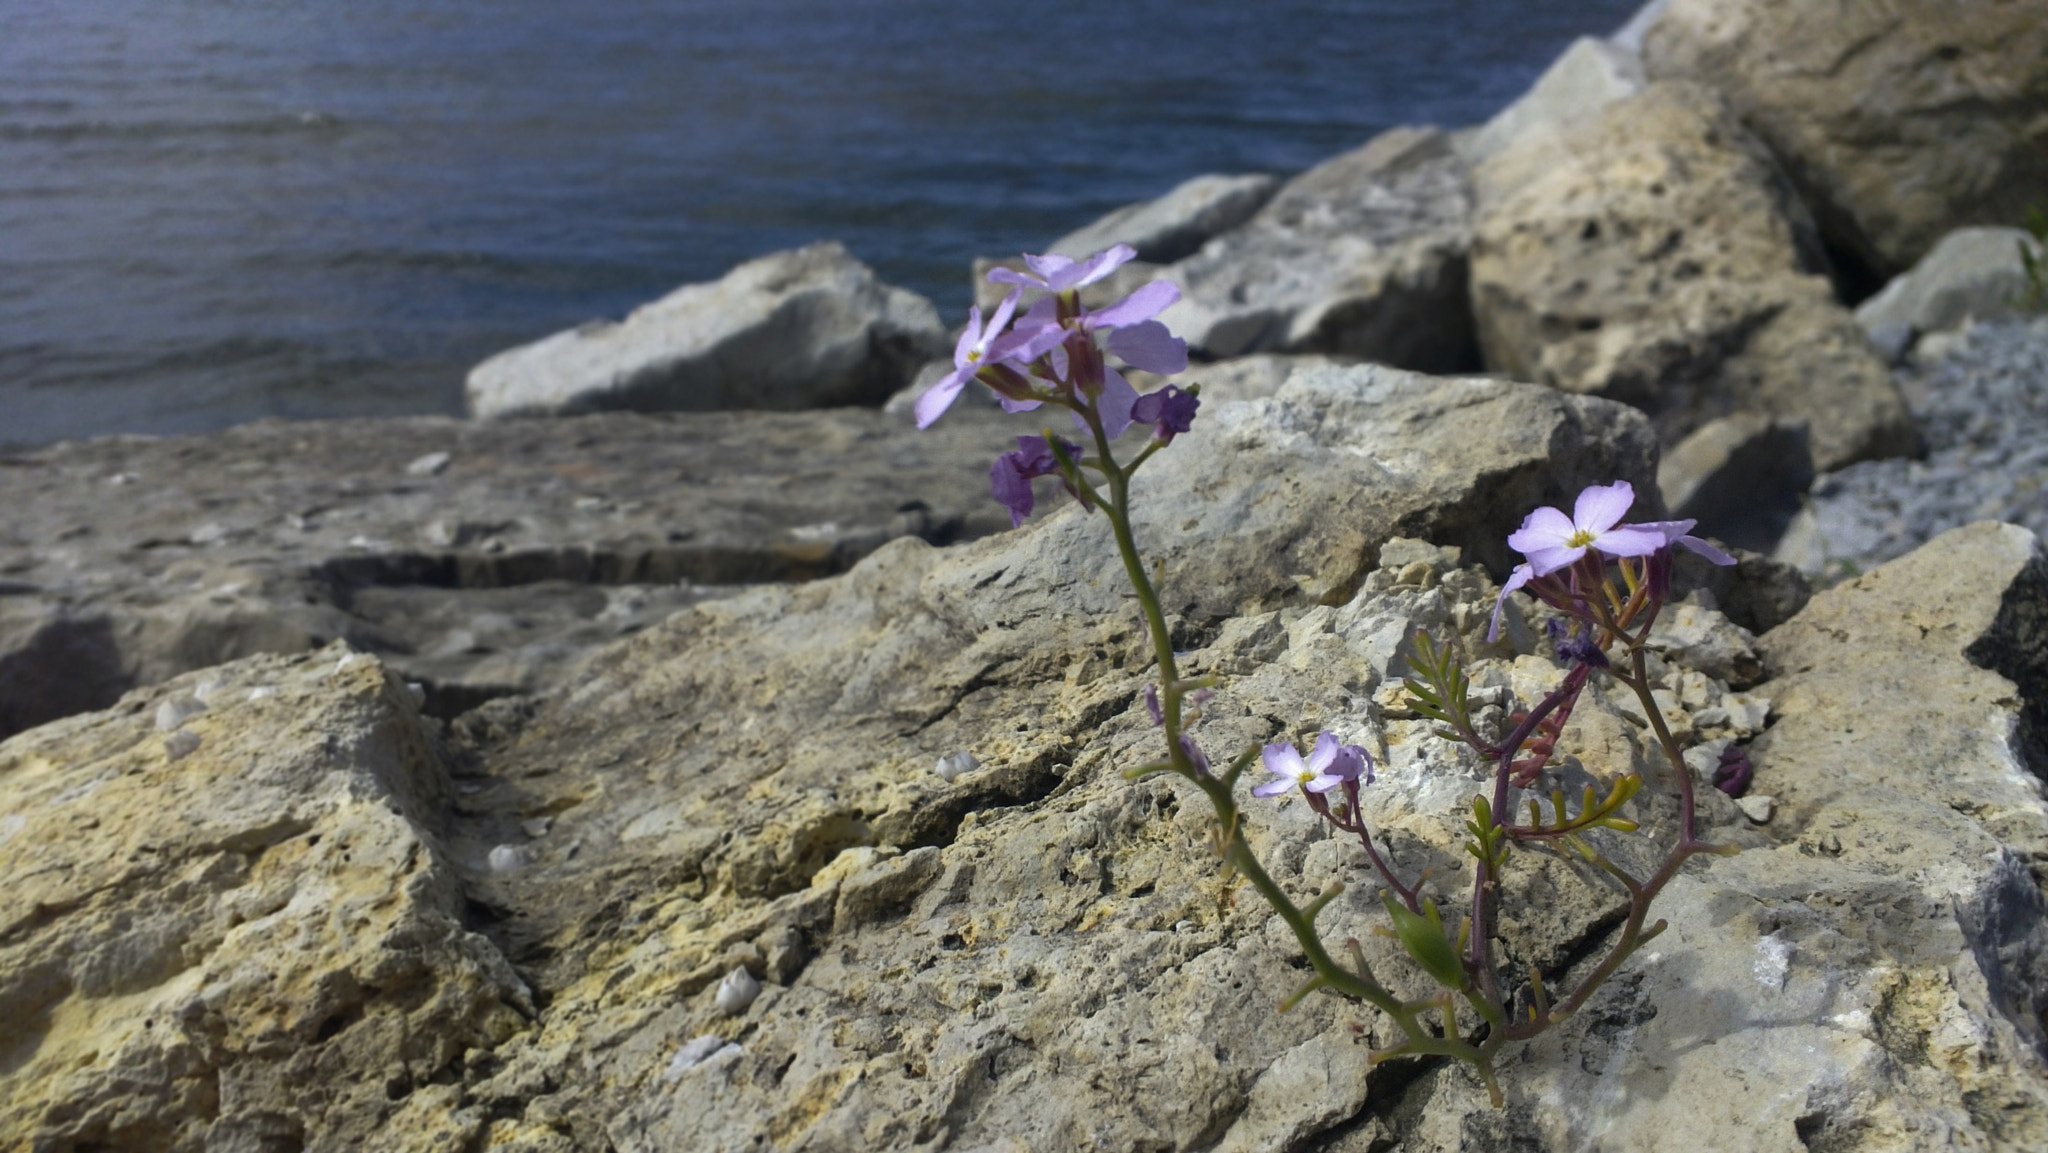 Nokia N9 sample photo. Flower by the sea photography